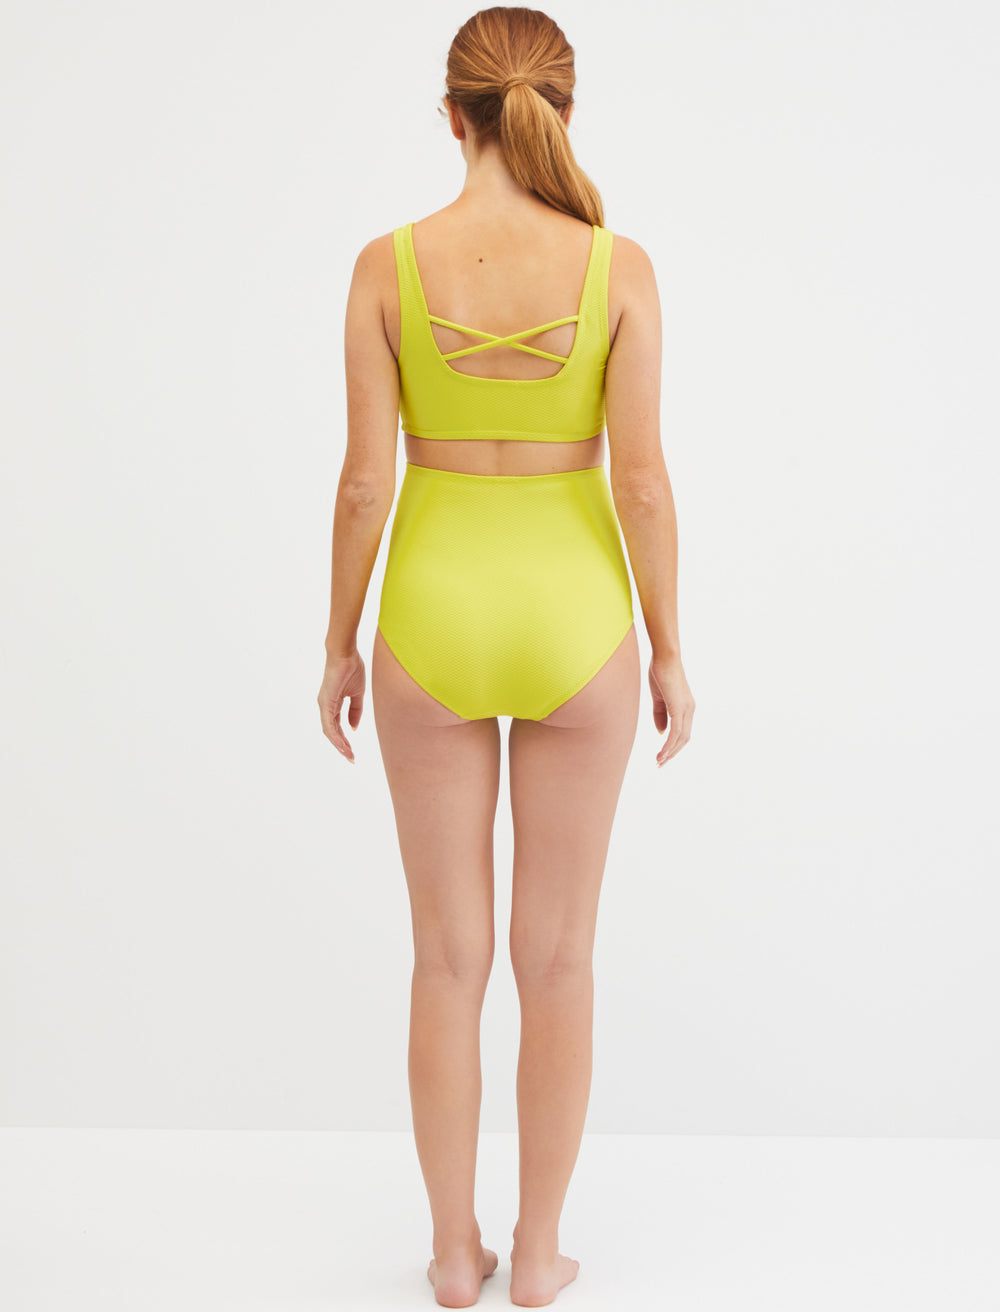 Spanx Slimmer And Shine Mid Thigh Open Bust Shaper Nude Bodysuit Size L  Size L - $41 - From Ava